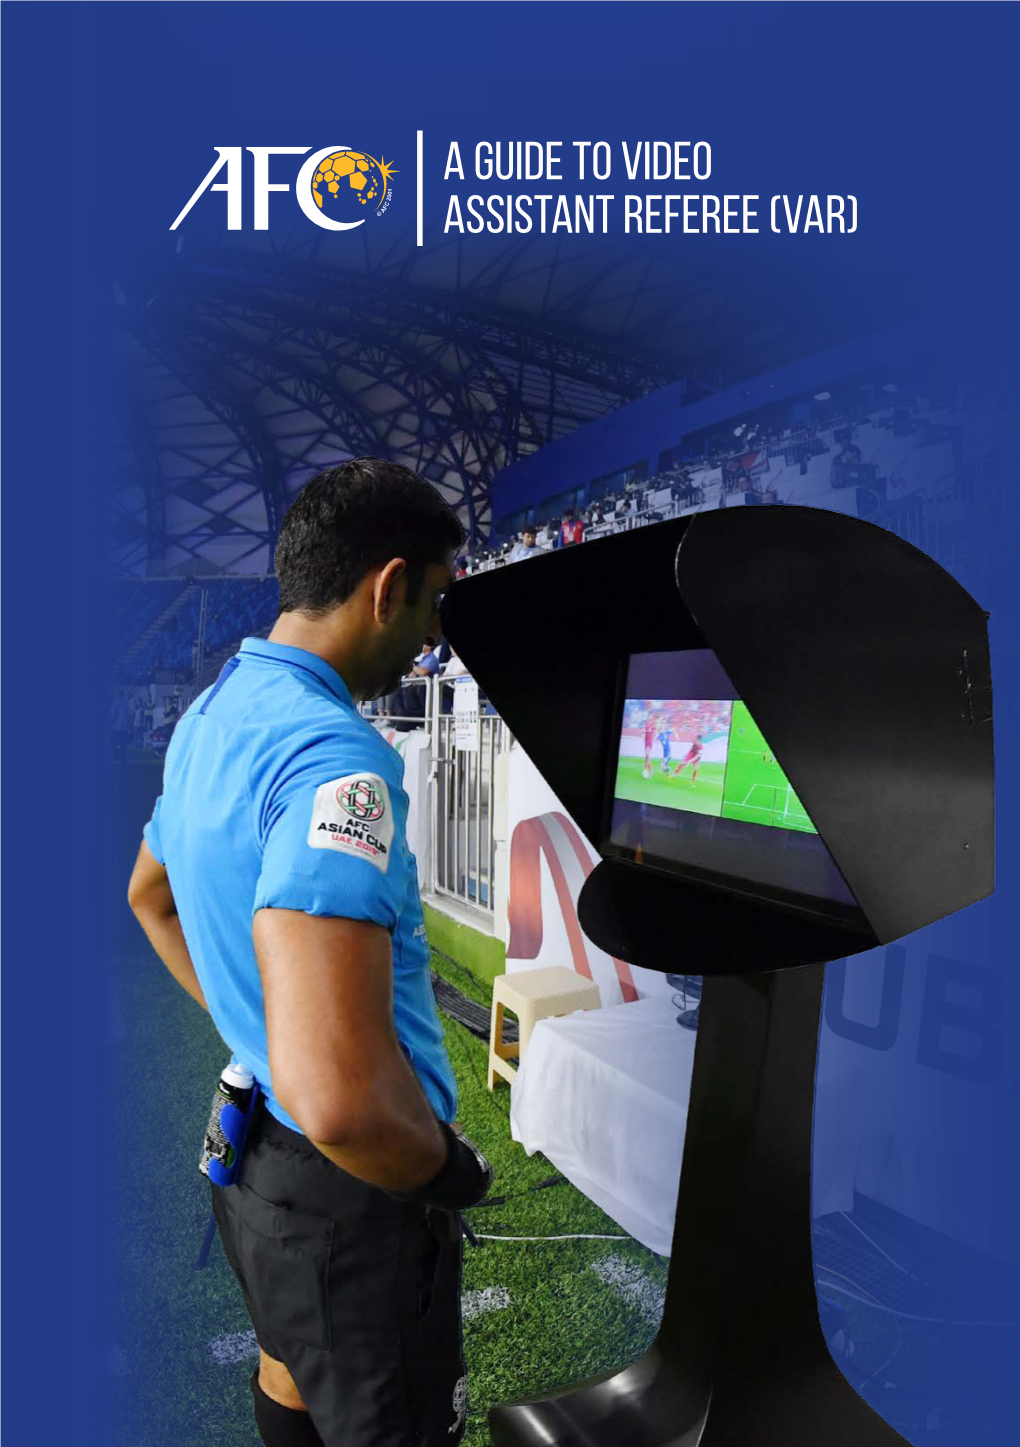 A GUIDE to VIDEO Assistant REFEREE (VAR)